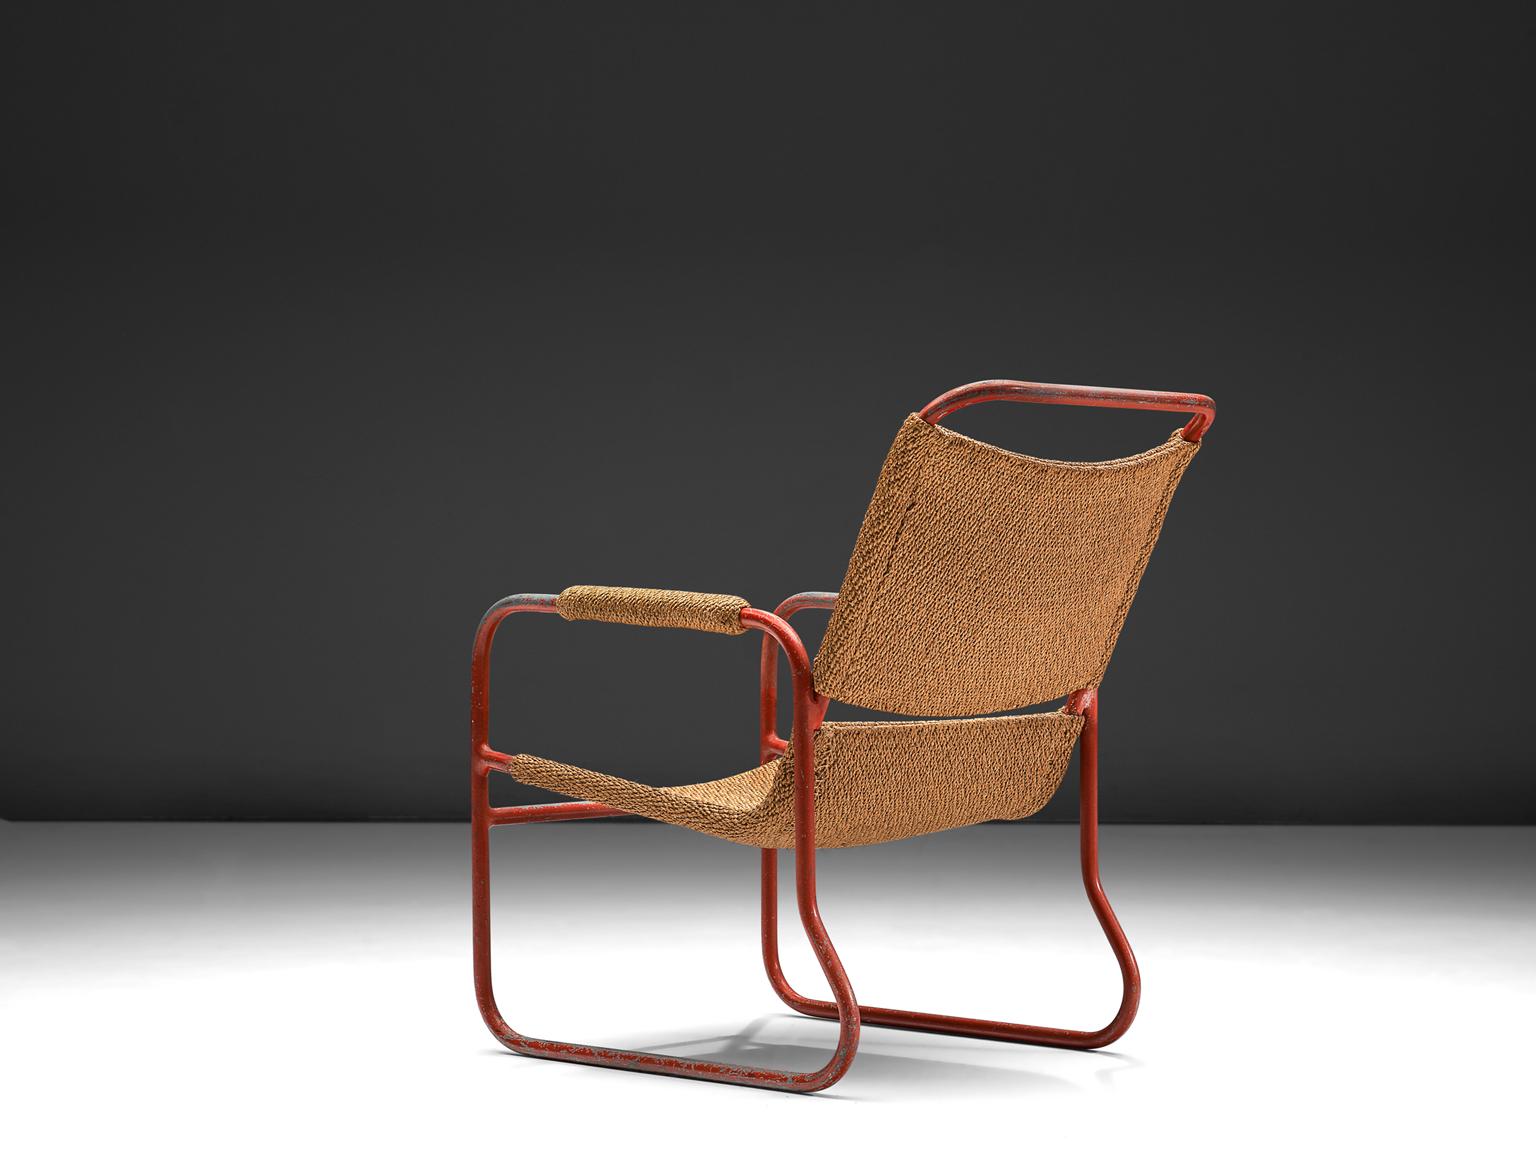 Bas Van Pelt, armchair, red tubular metal and sisal armchair, the Netherlands, 1930s.

This Classic armchair is designed by Bas Van Pelt and is executed with a wicker sisal back and seat. The armrests too are covered with this natural material.